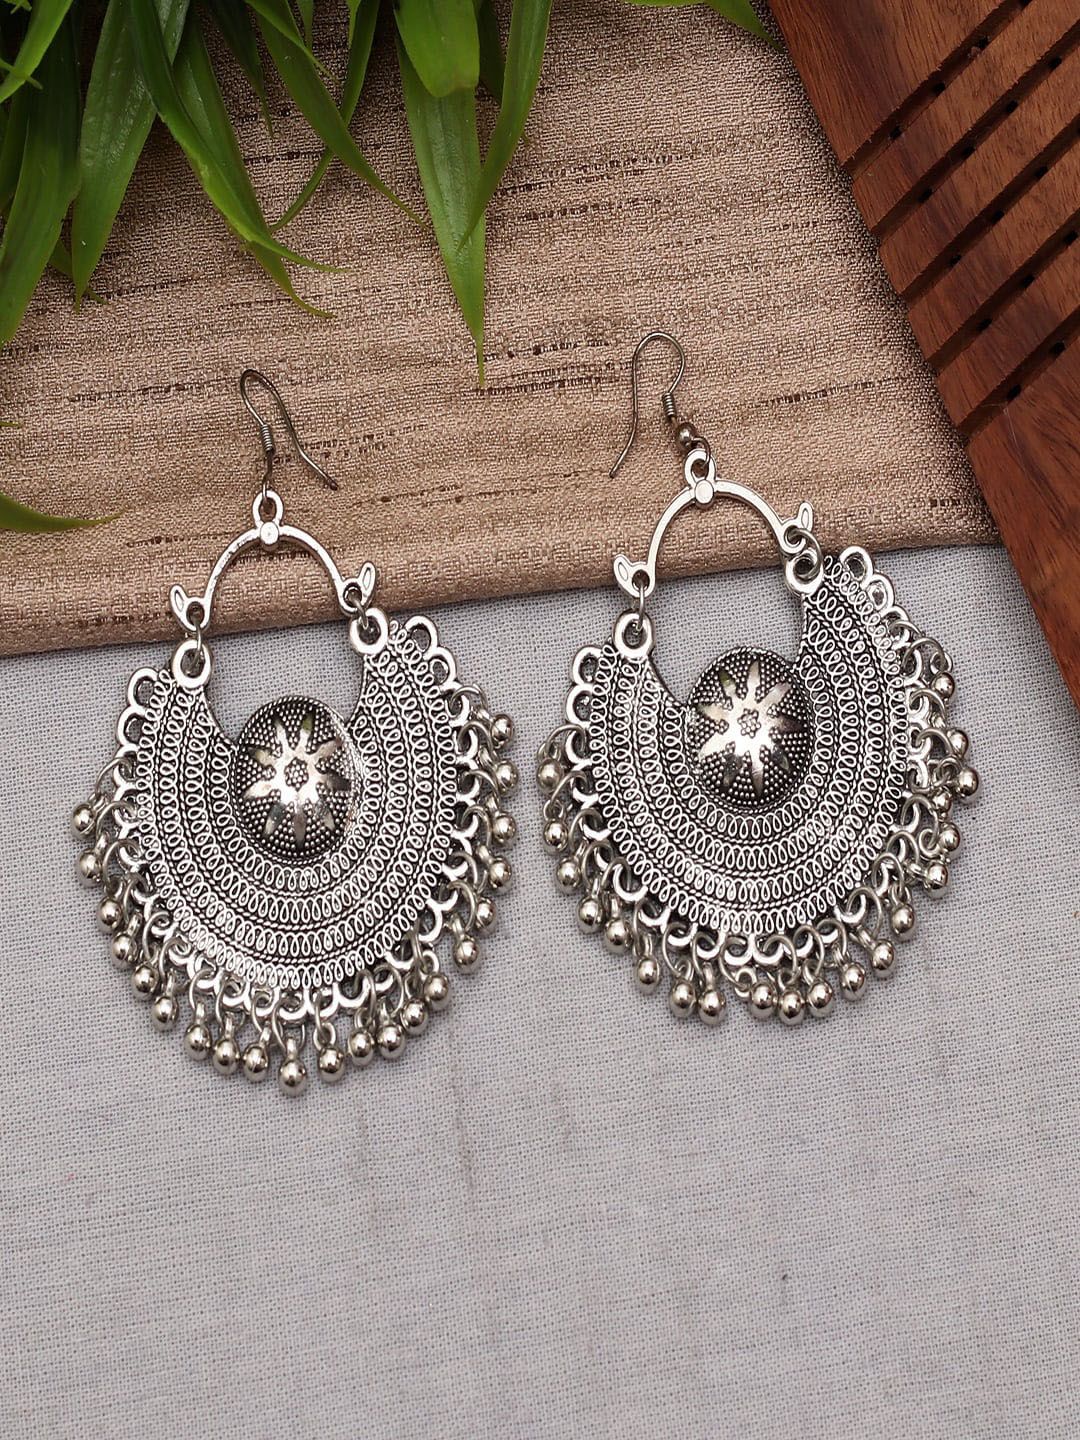 Ethonica Silver-Toned Classic Chandbalis Earrings Price in India